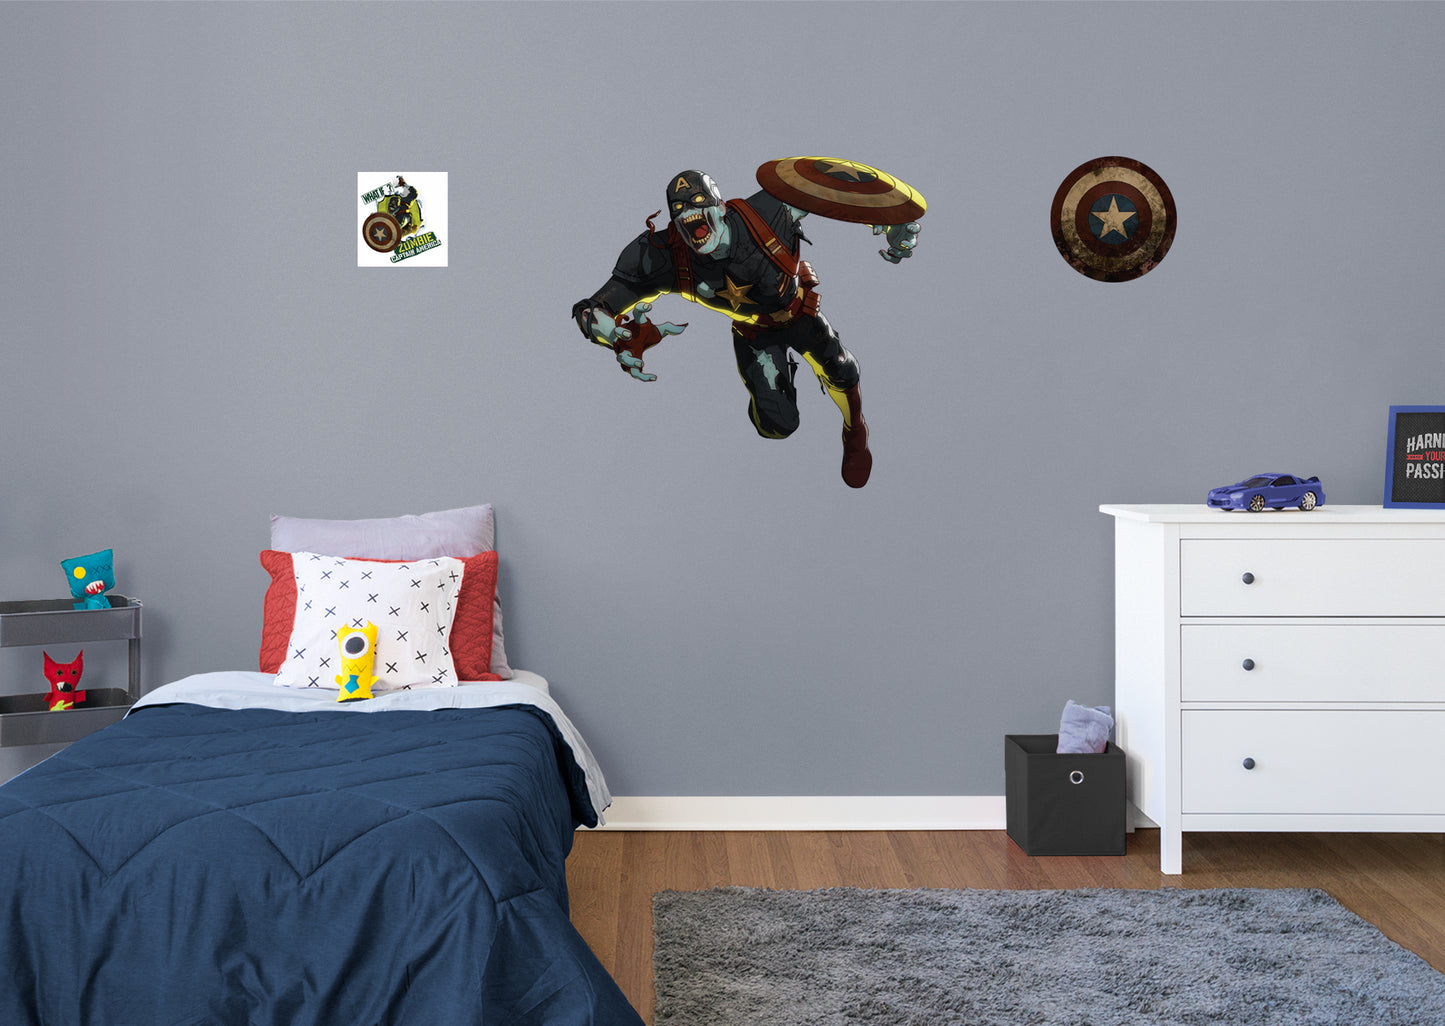 What If...: Zombie Capt. America Realbig        - Officially Licensed Marvel Removable Wall   Adhesive Decal